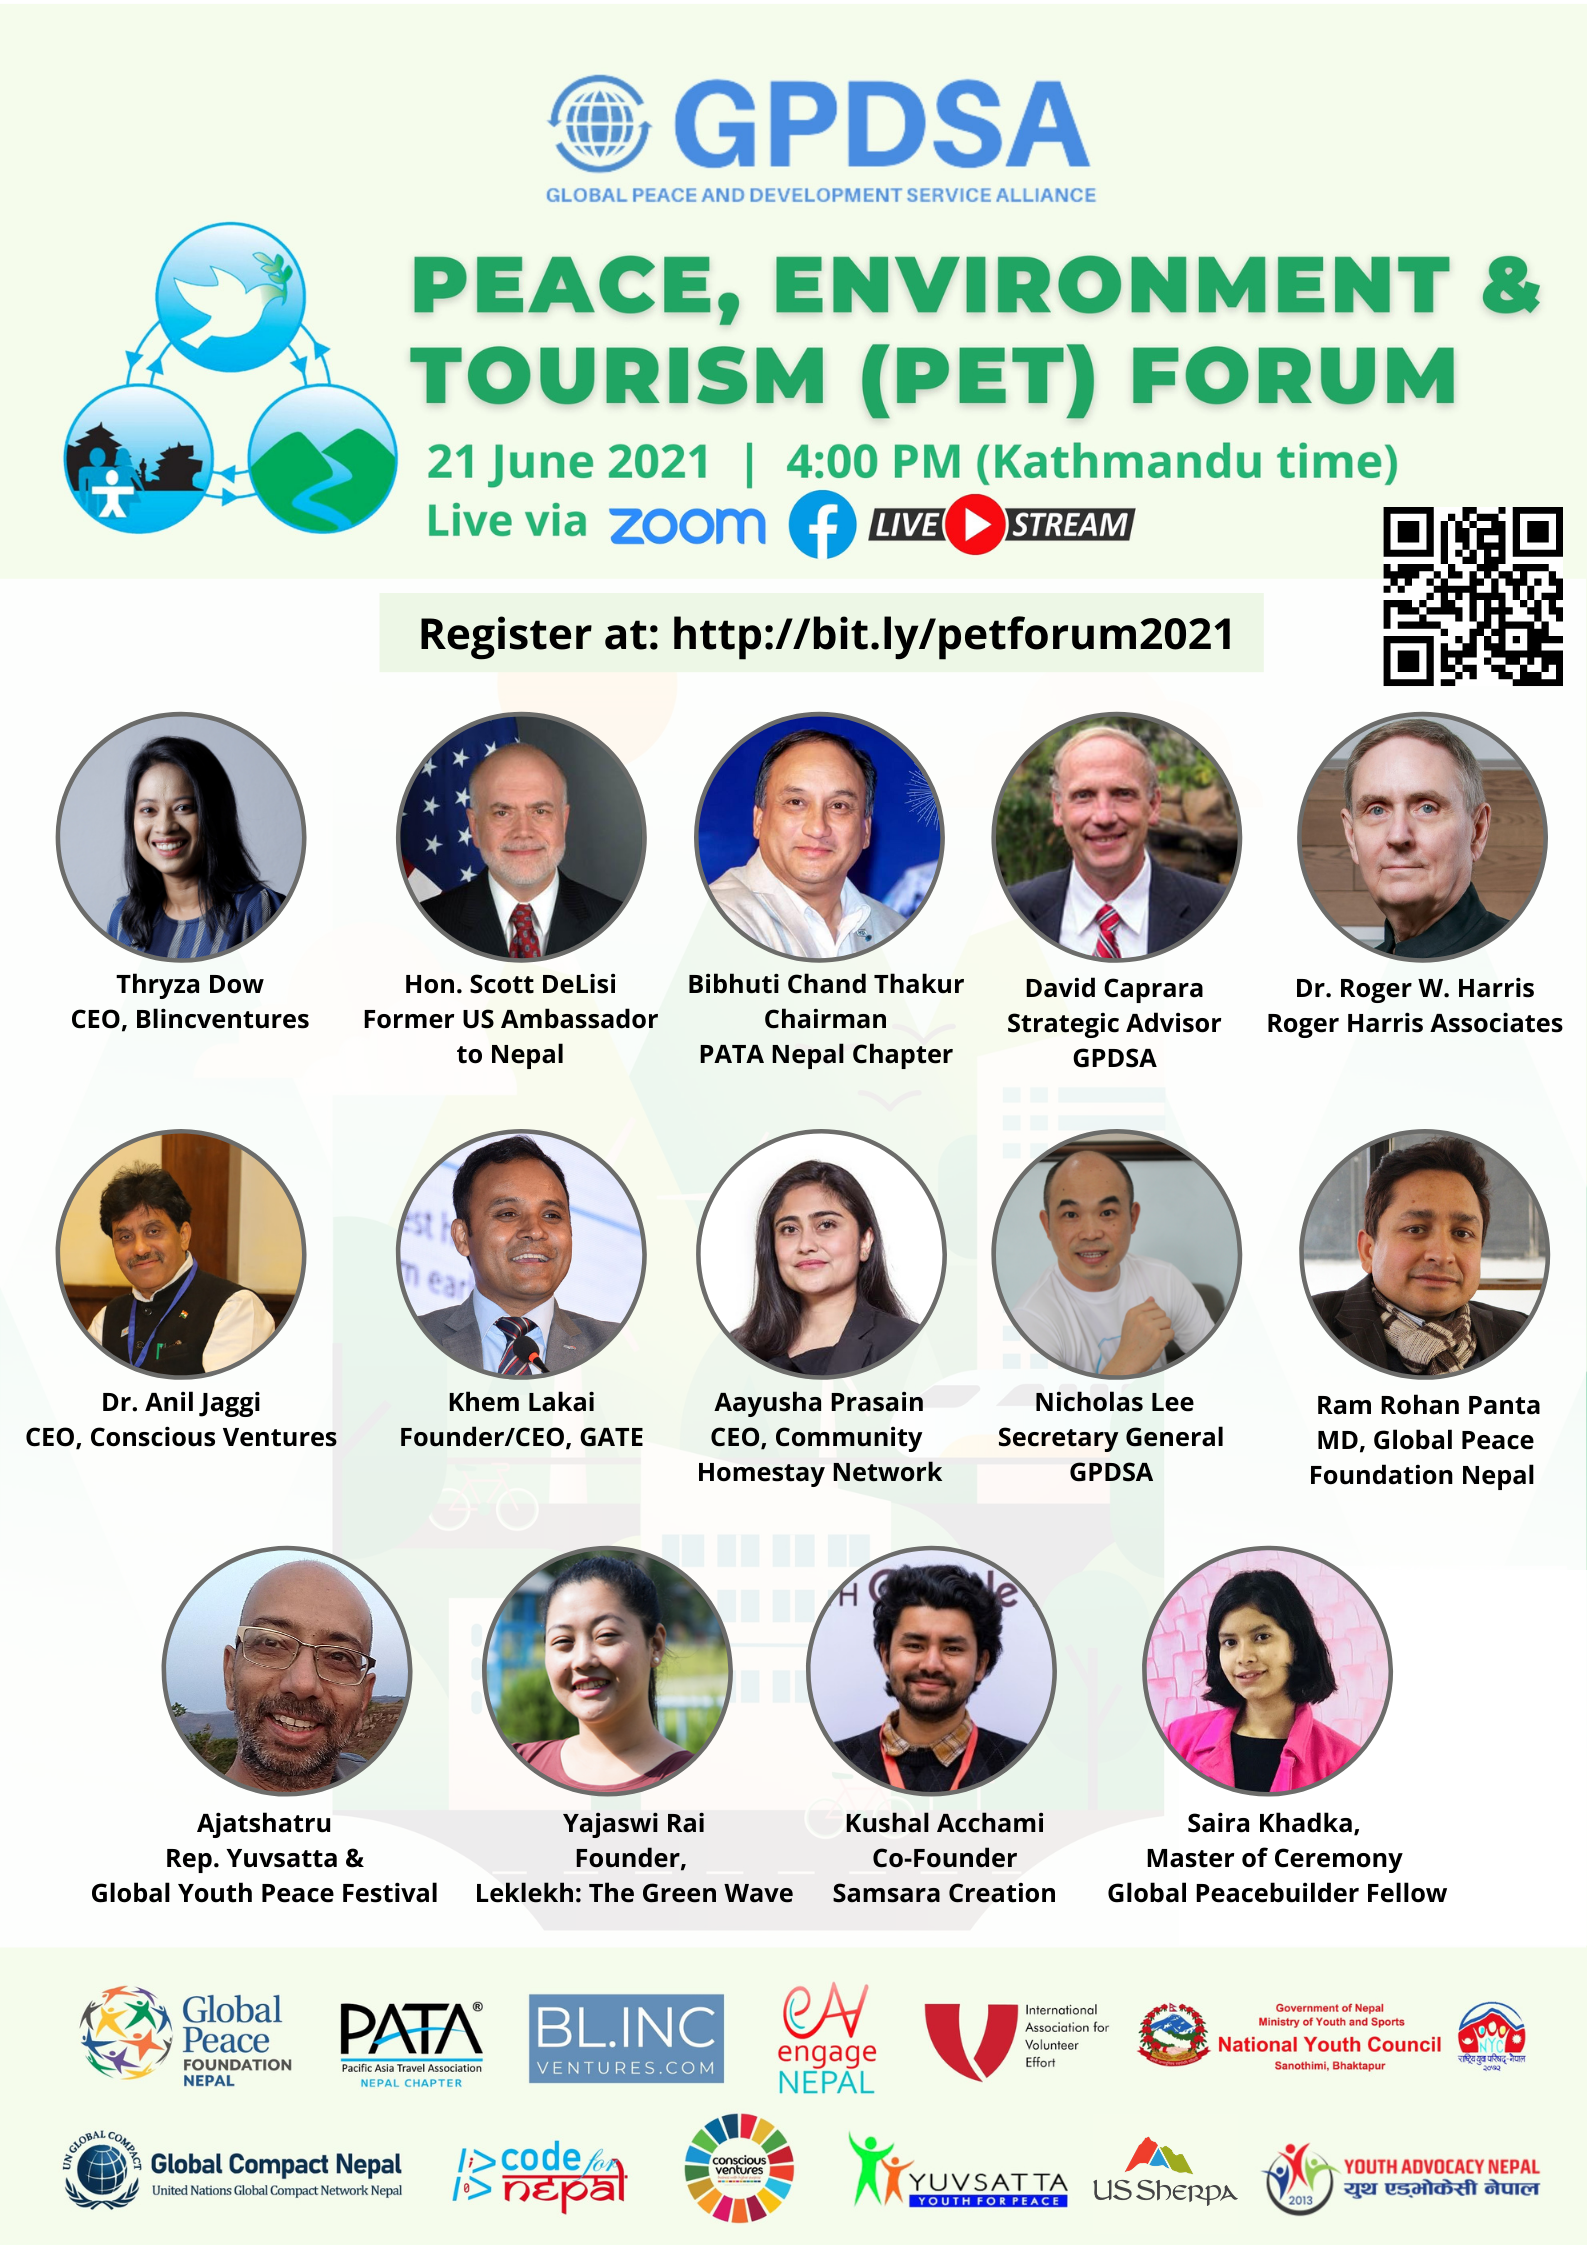 GPDSA organized "Peace, Environment And Tourism (PET) Forum 2021" in collaboration with PATA Nepal Chapter